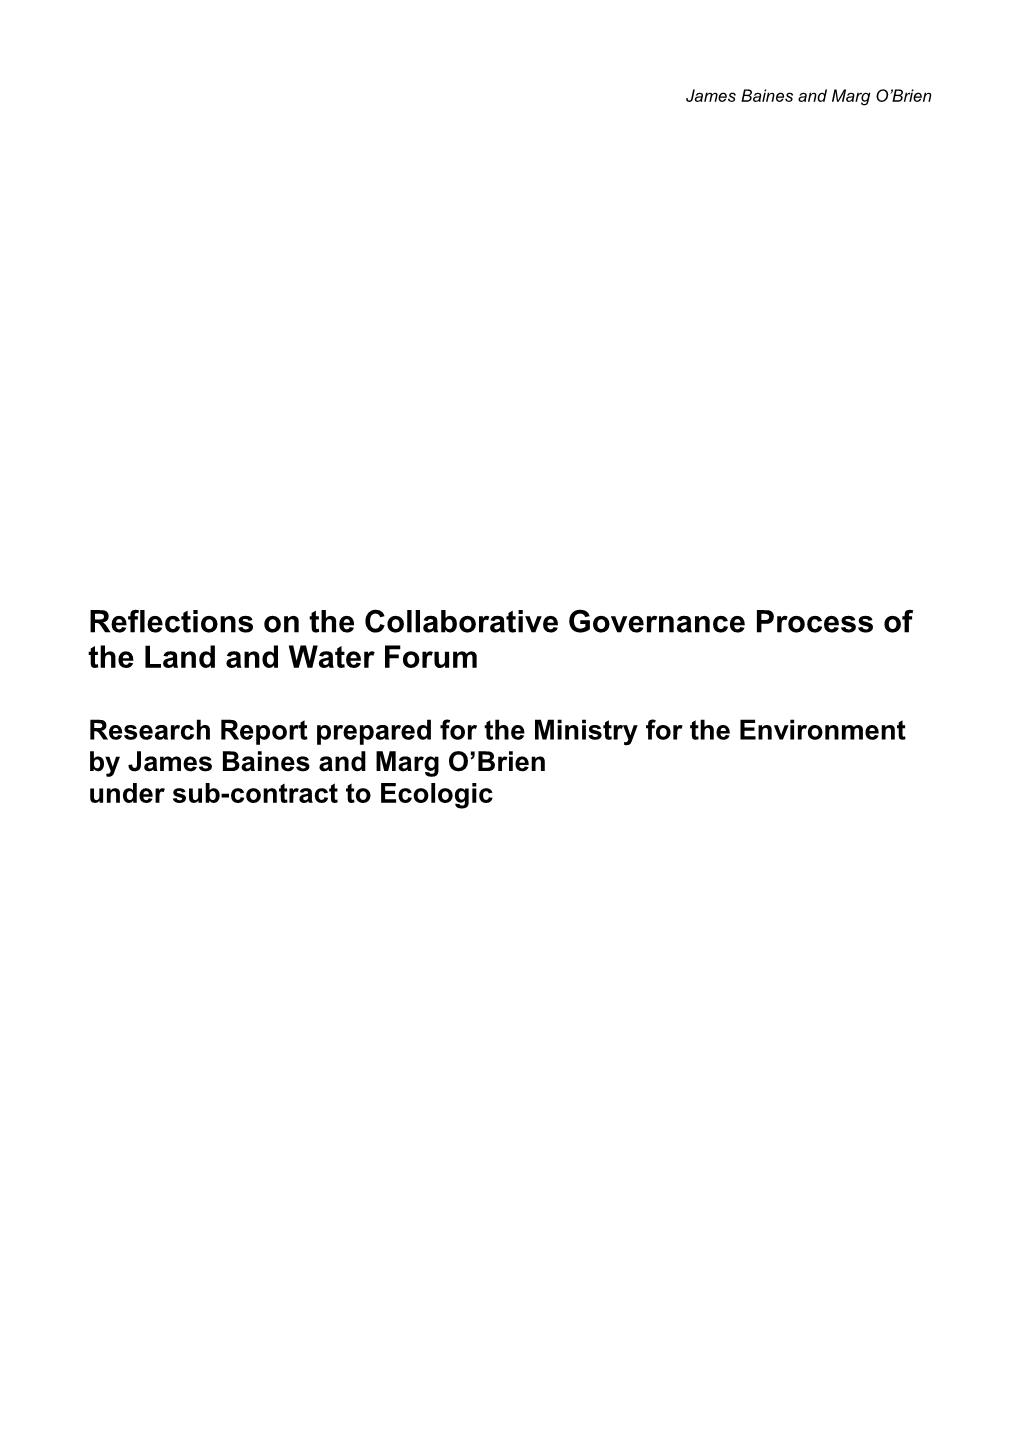 Reflections On The Collaborative Governance Process Of The Lwforum Final Nov 2012